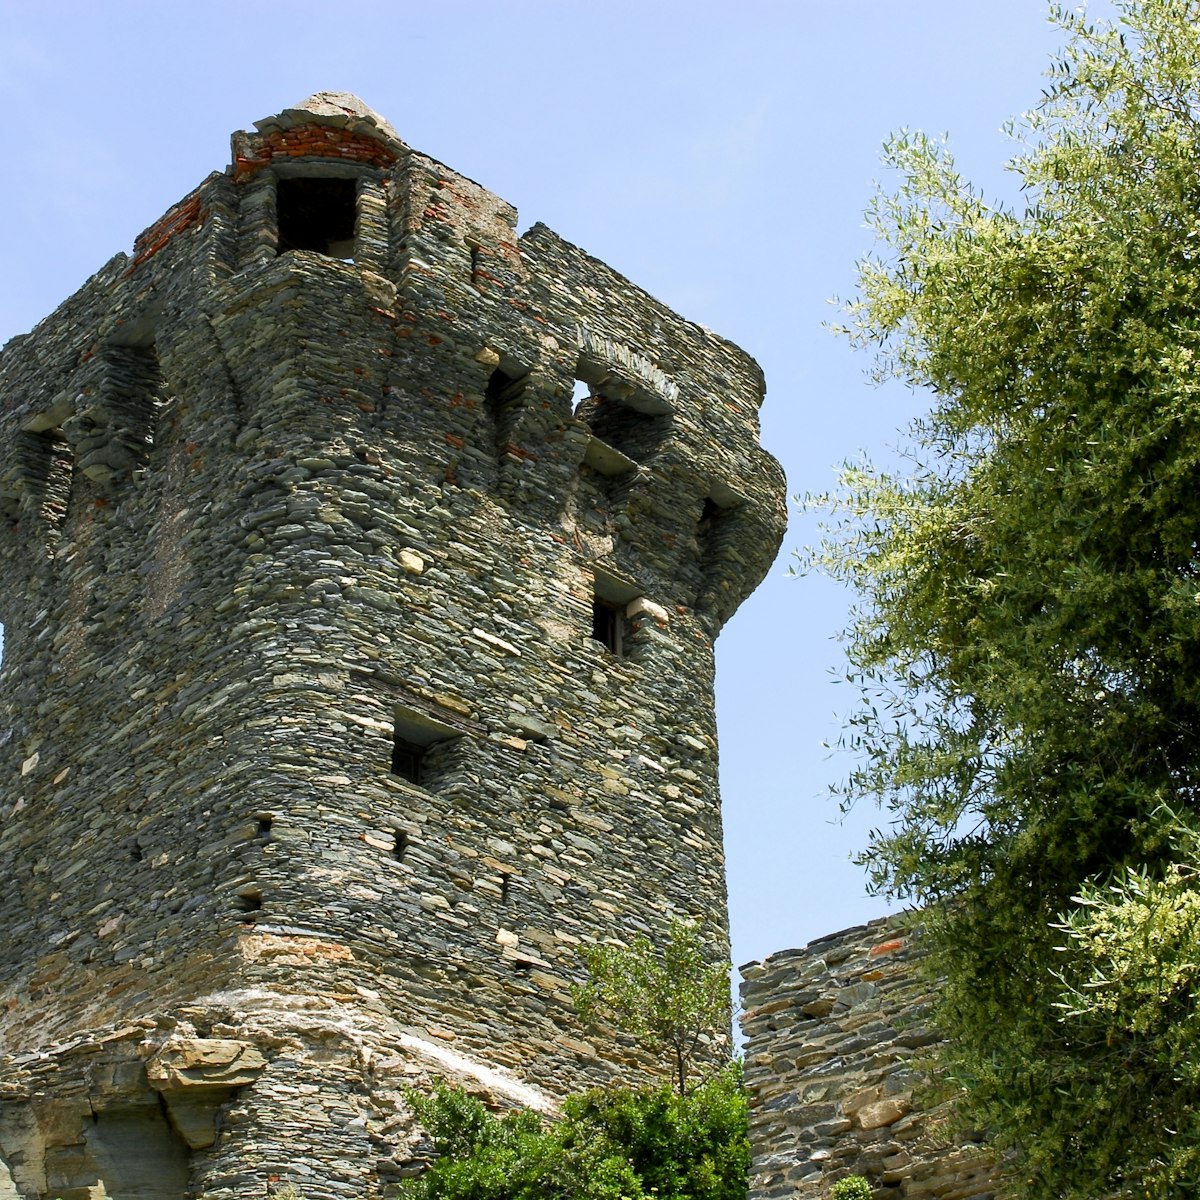 Tower in Nonza, Corsica, France.